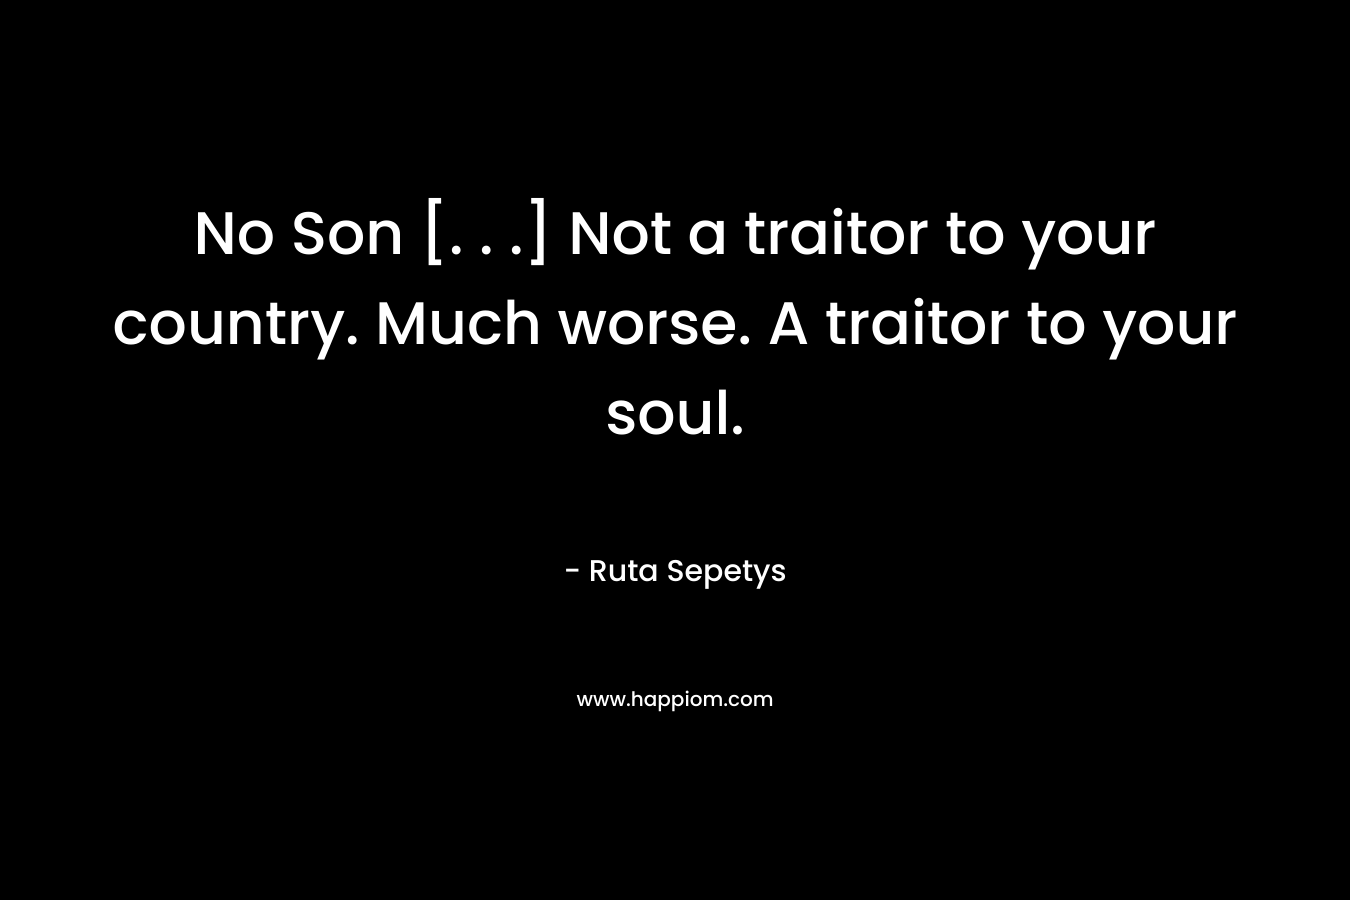 No Son [. . .] Not a traitor to your country. Much worse. A traitor to your soul. – Ruta Sepetys